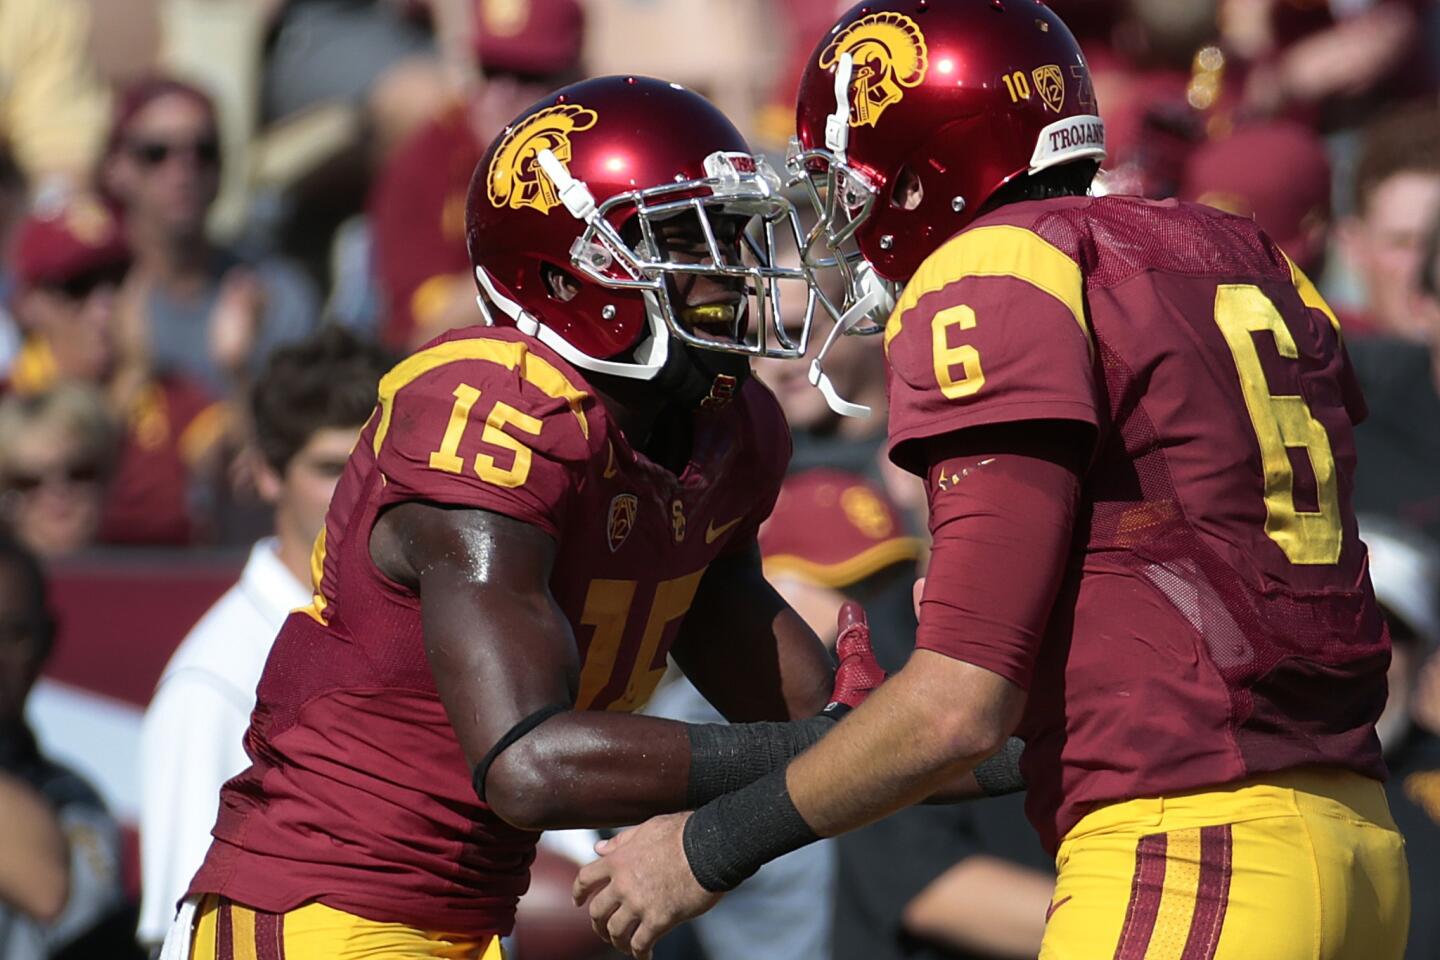 USC receiver Nelson Agholor celebrates with quarterback Cody Kessler after one of his three touchdown catches Saturday against Colorado.